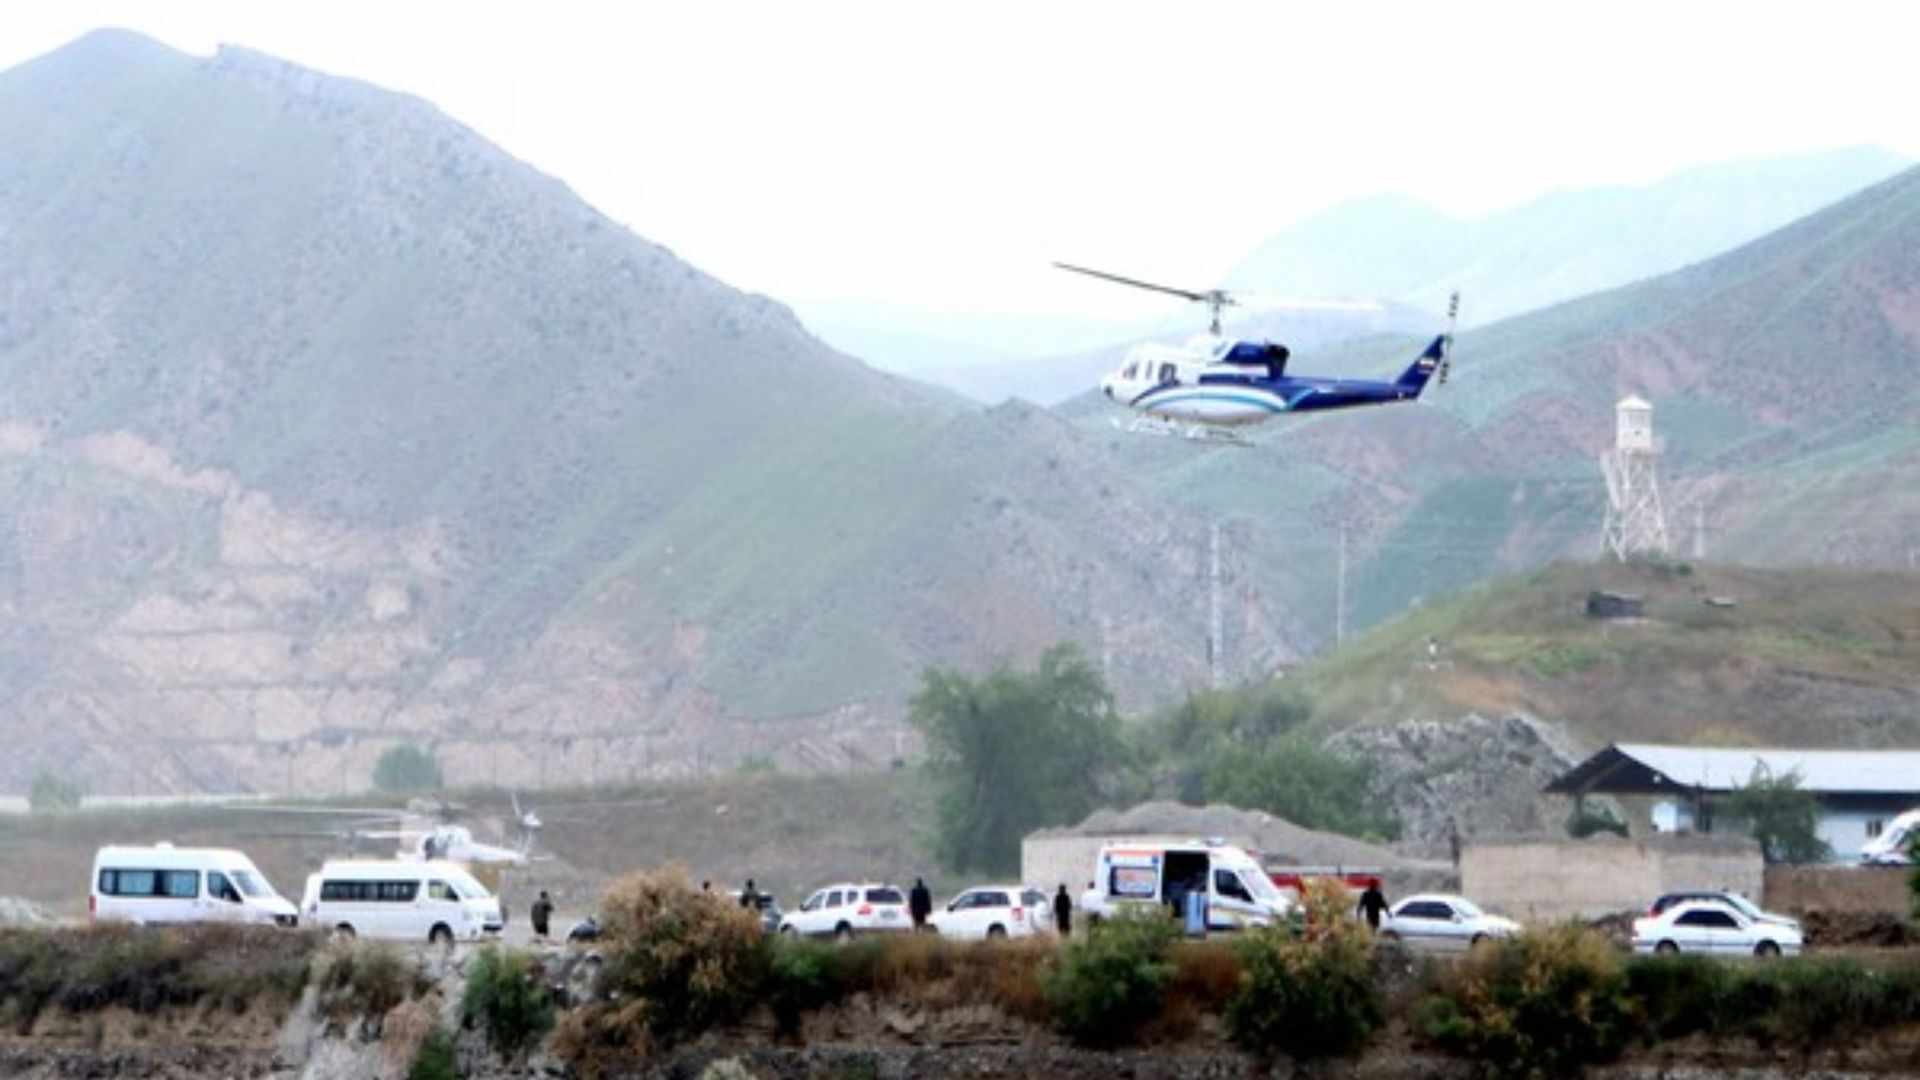 Iran President’s Helicopter Crash: Rescue Teams Mobilized After Turkish Drone Detects Heat Source